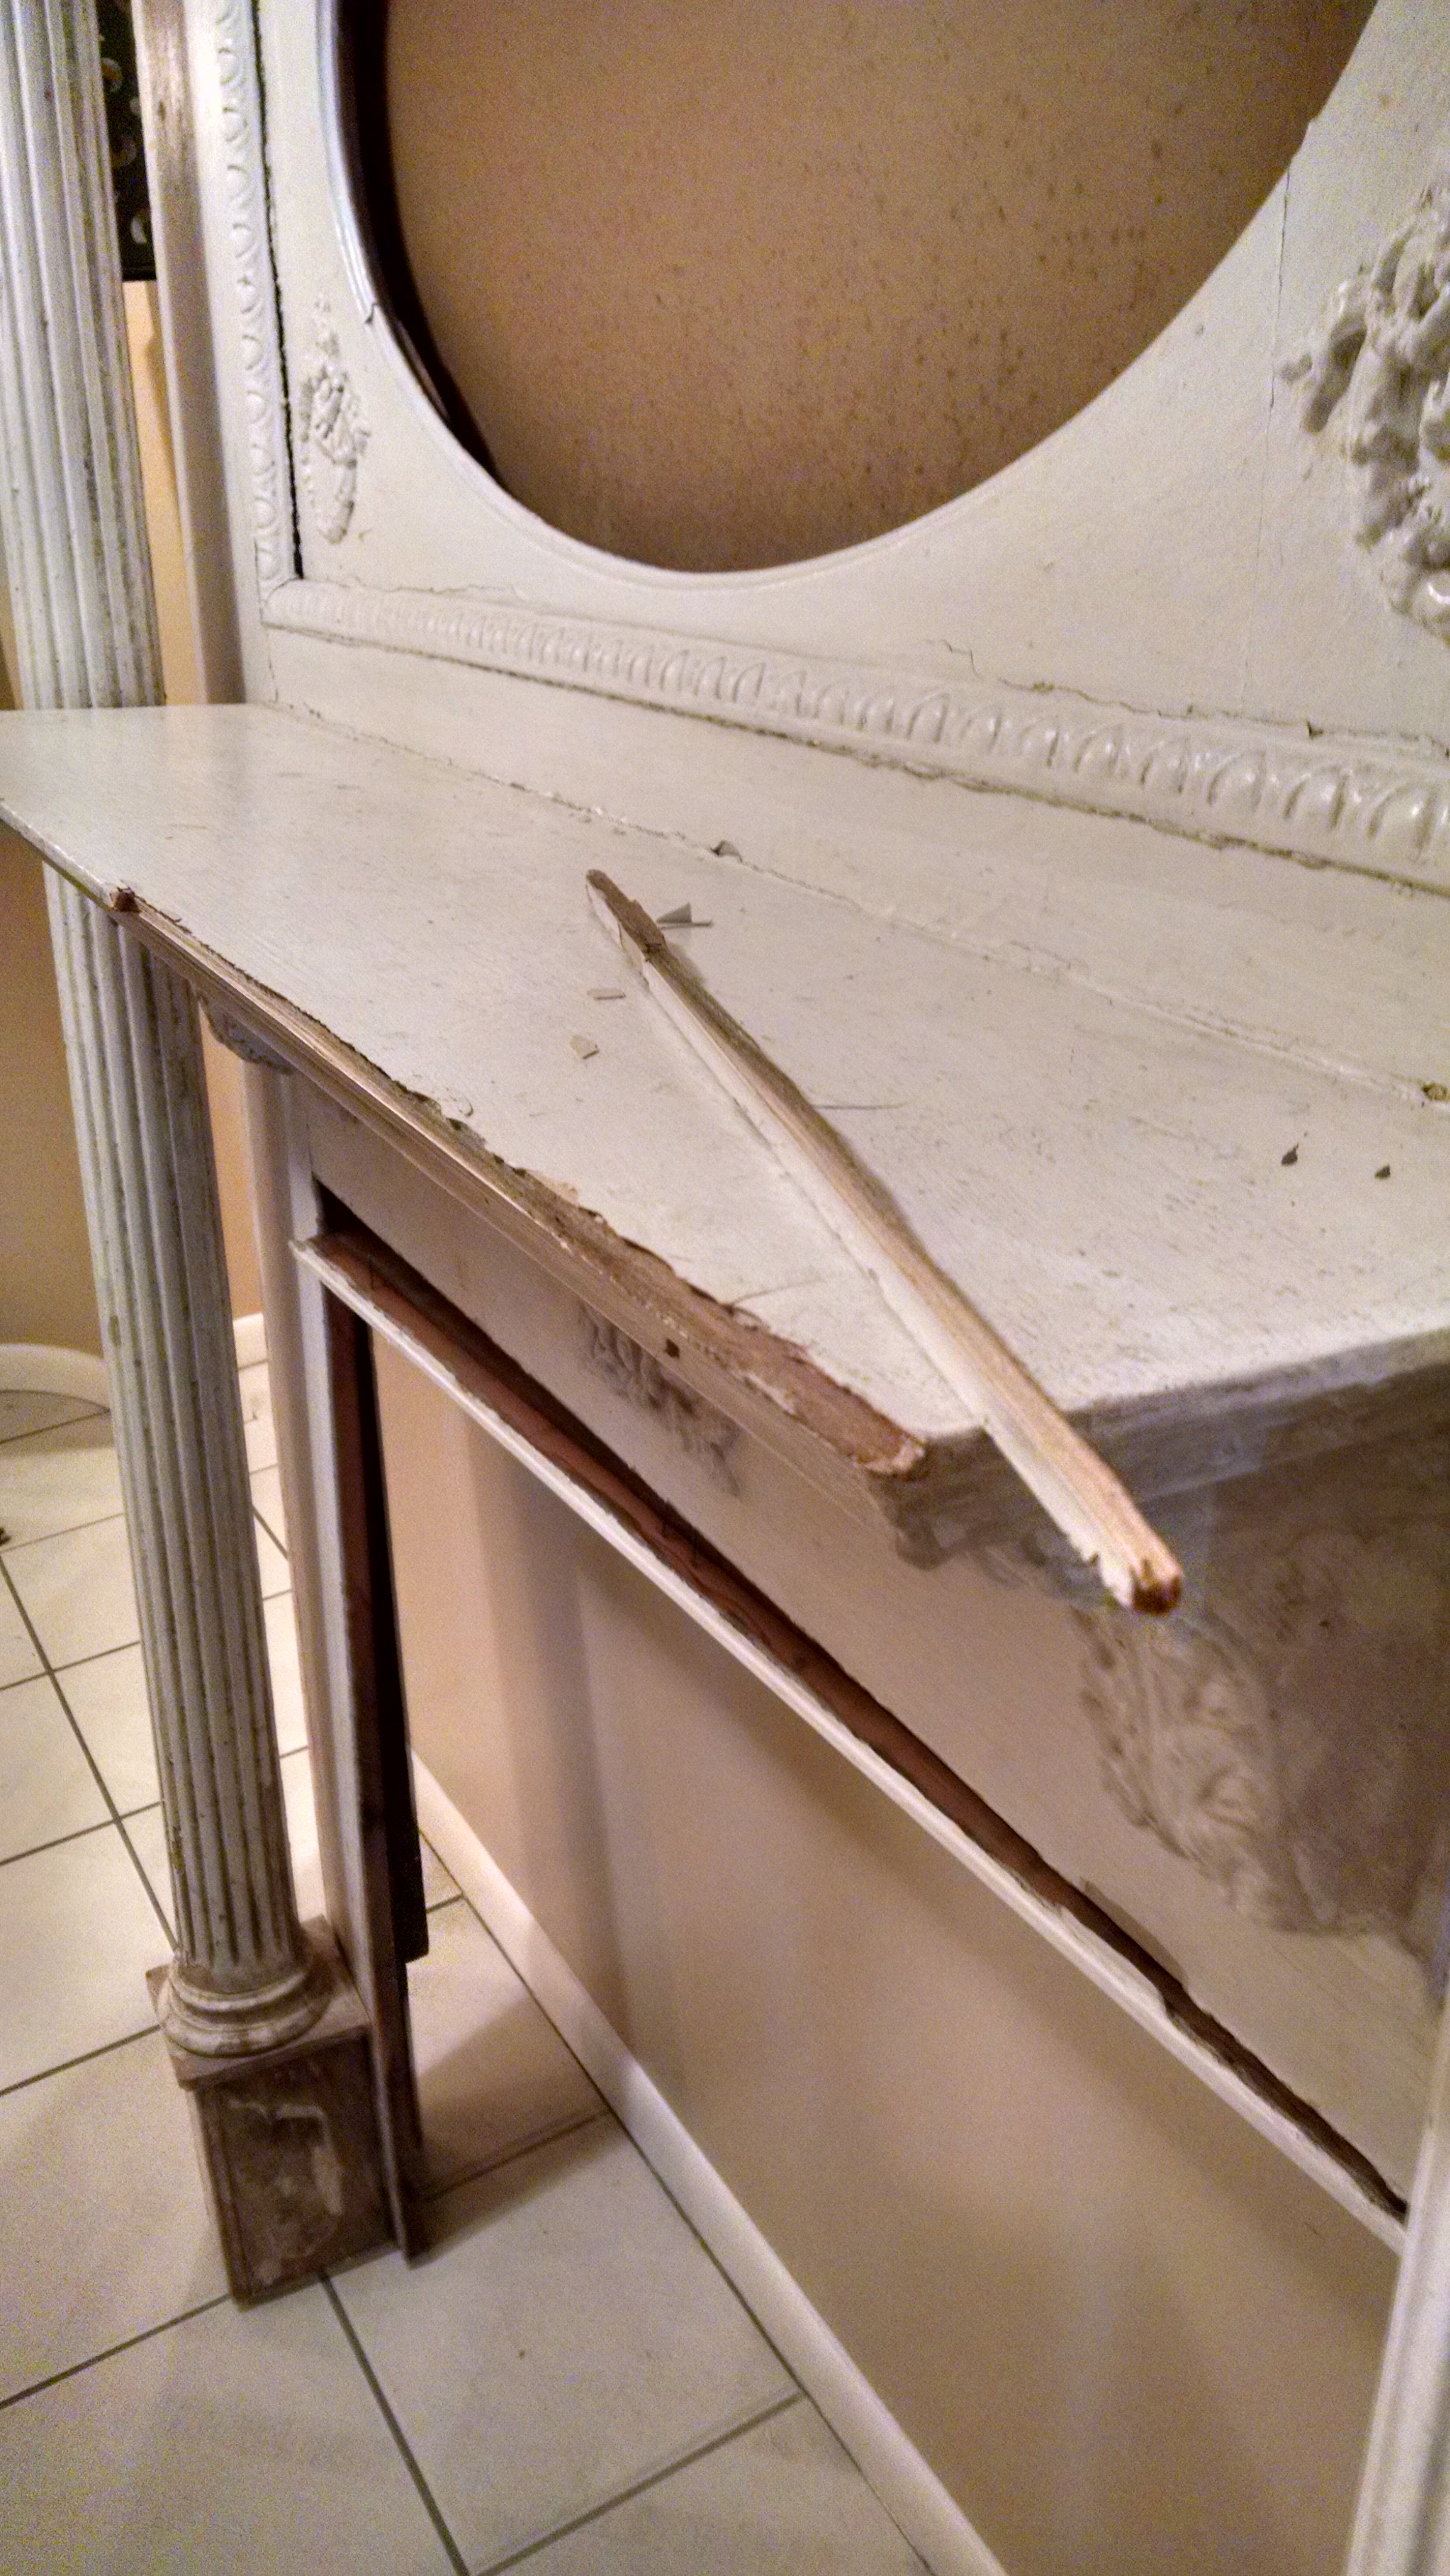 My antique fireplace mantle was broken in 3 places